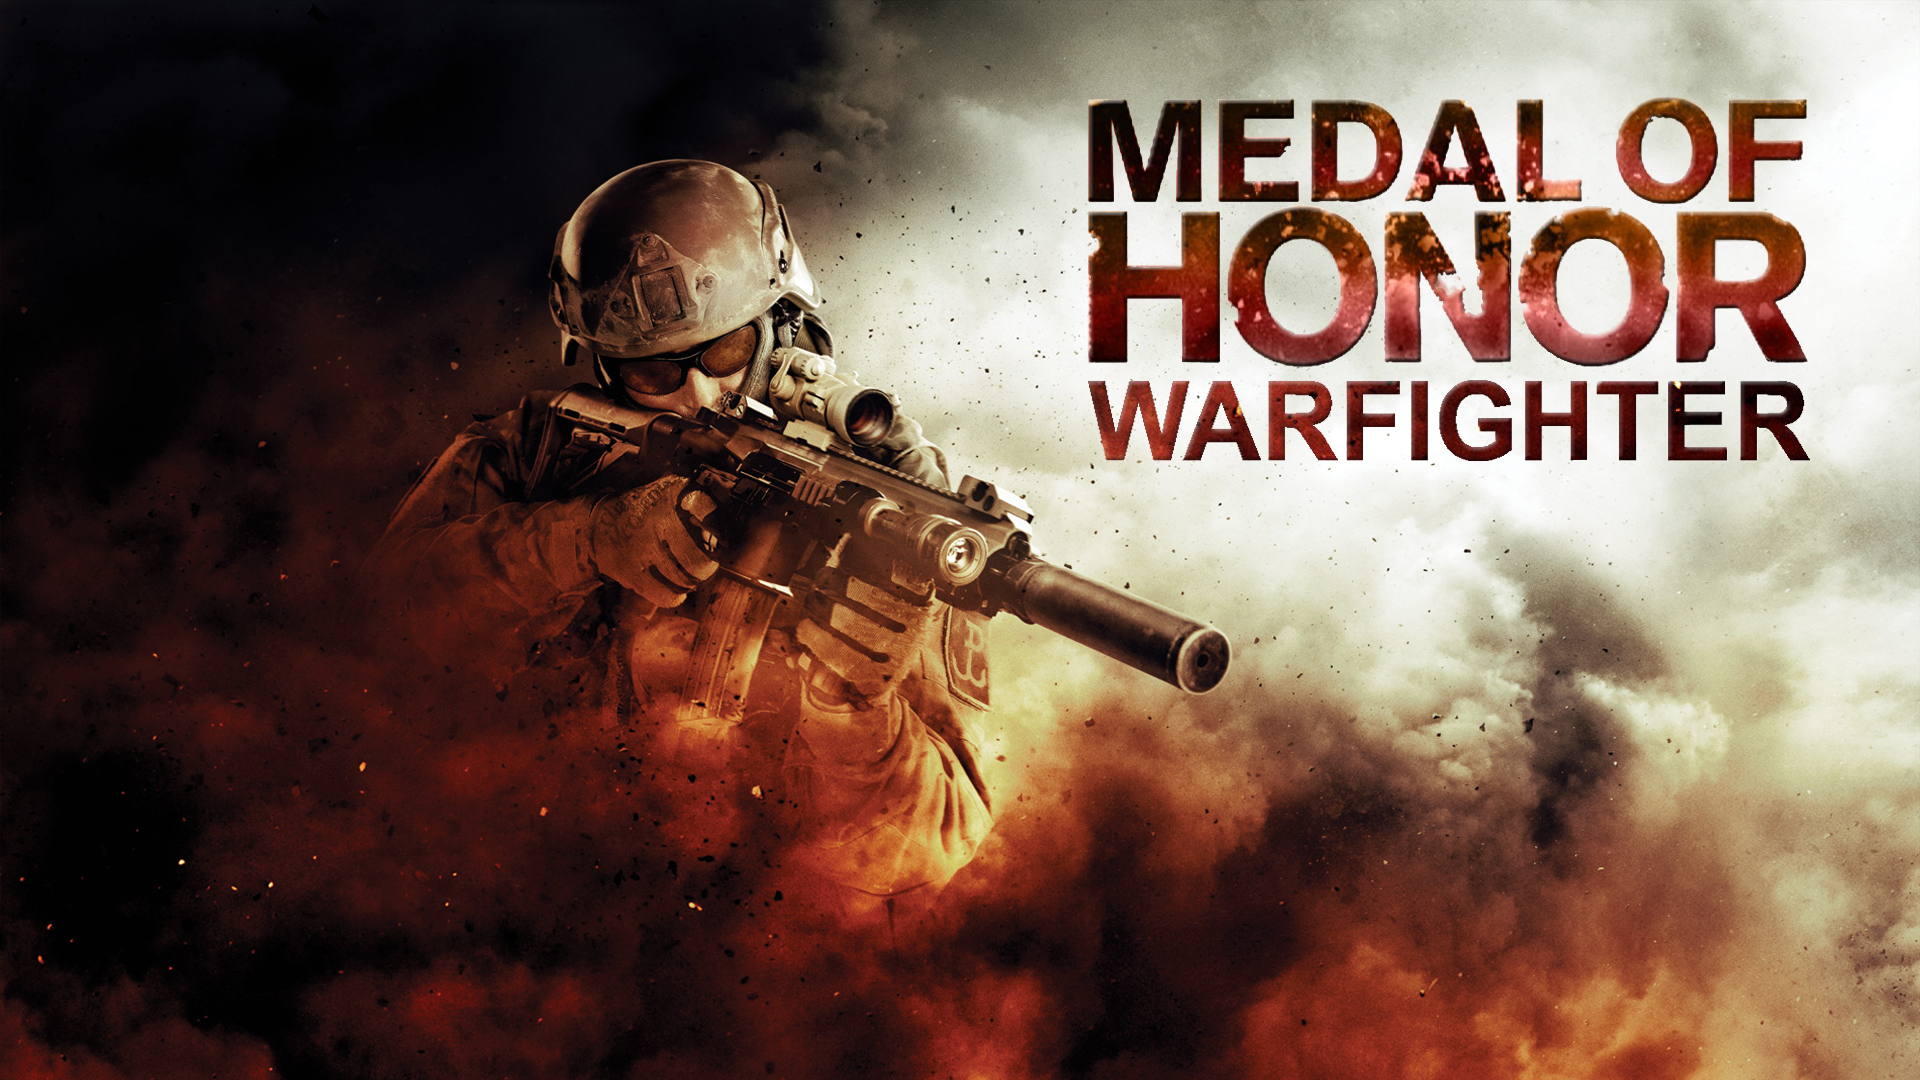 Medal of Honor Warfighter Video Game Wallpapers | Wallpapers HD1920 x 1080